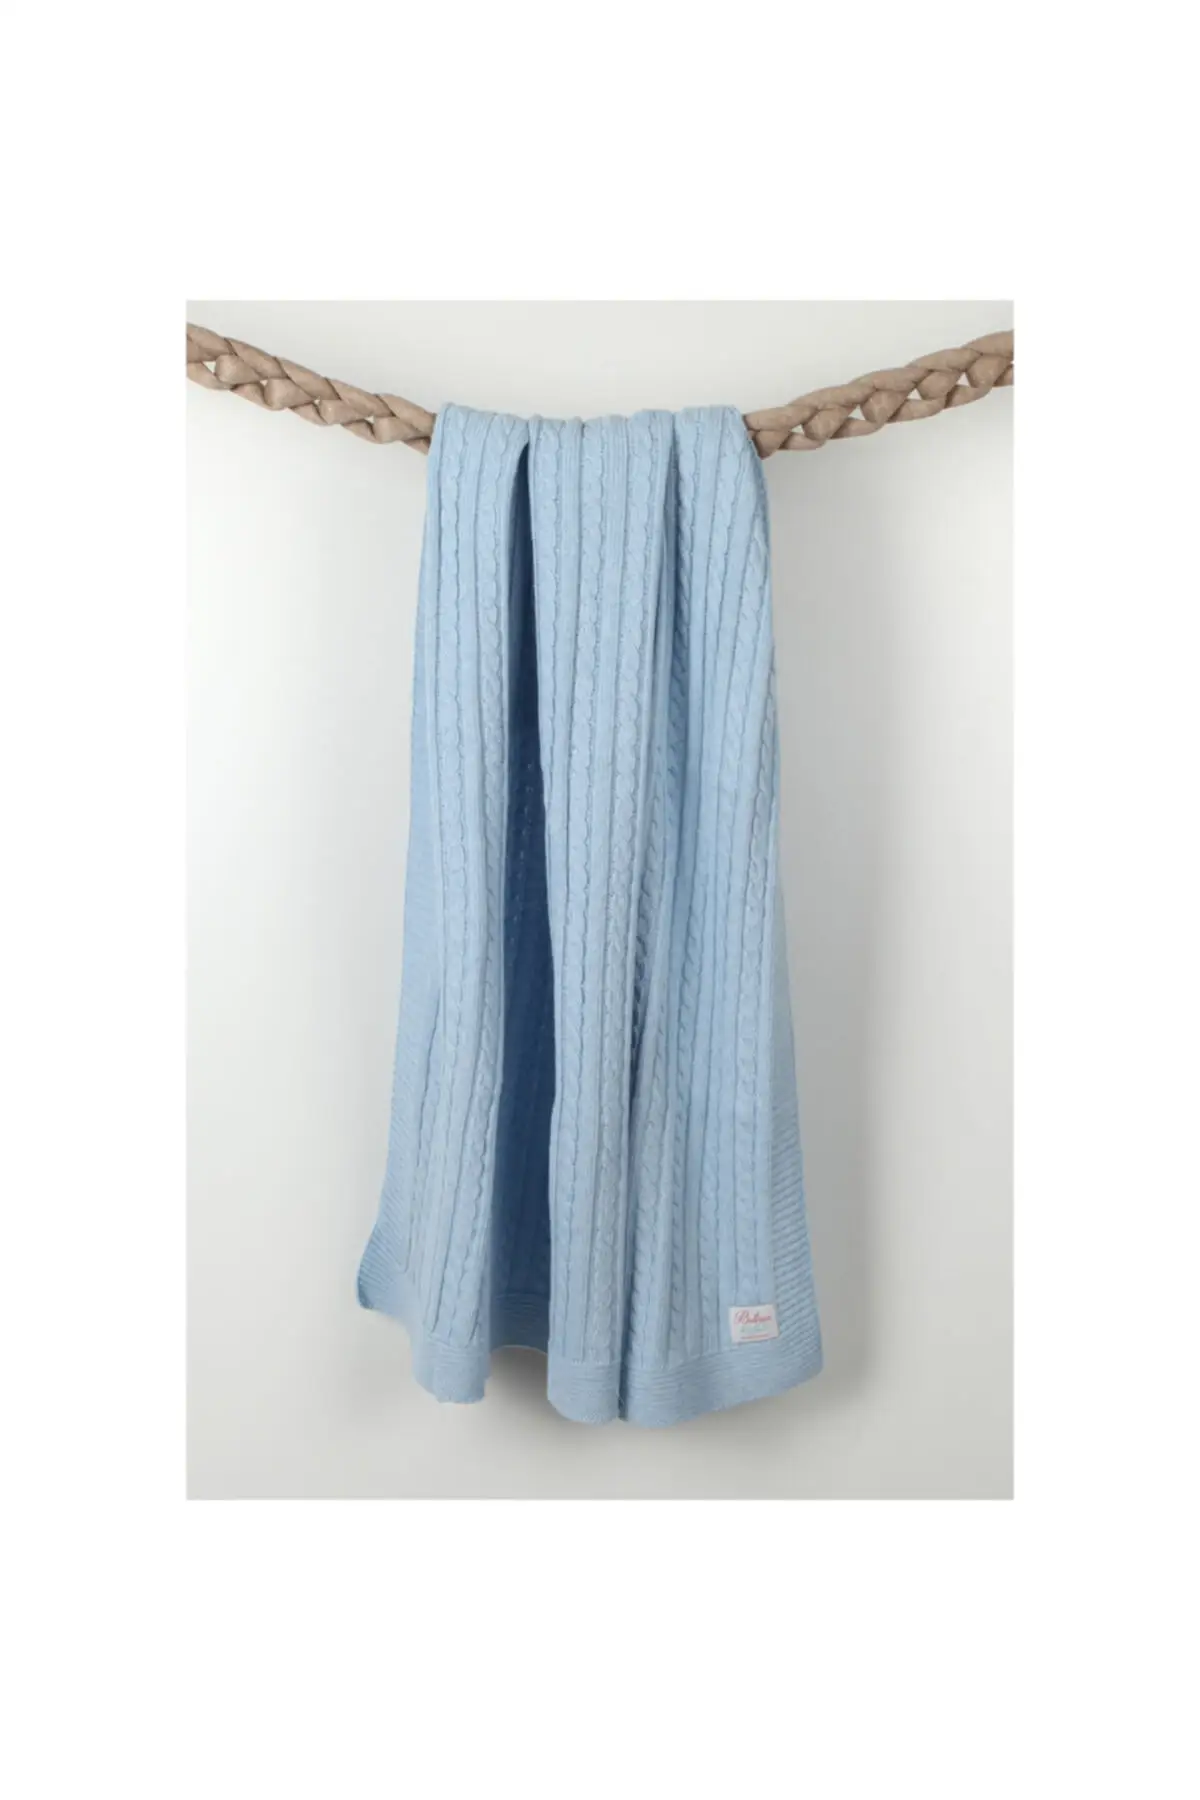 Knit Baby Blanket Blue White Baby & Kids Home Textile Textile & Furniture